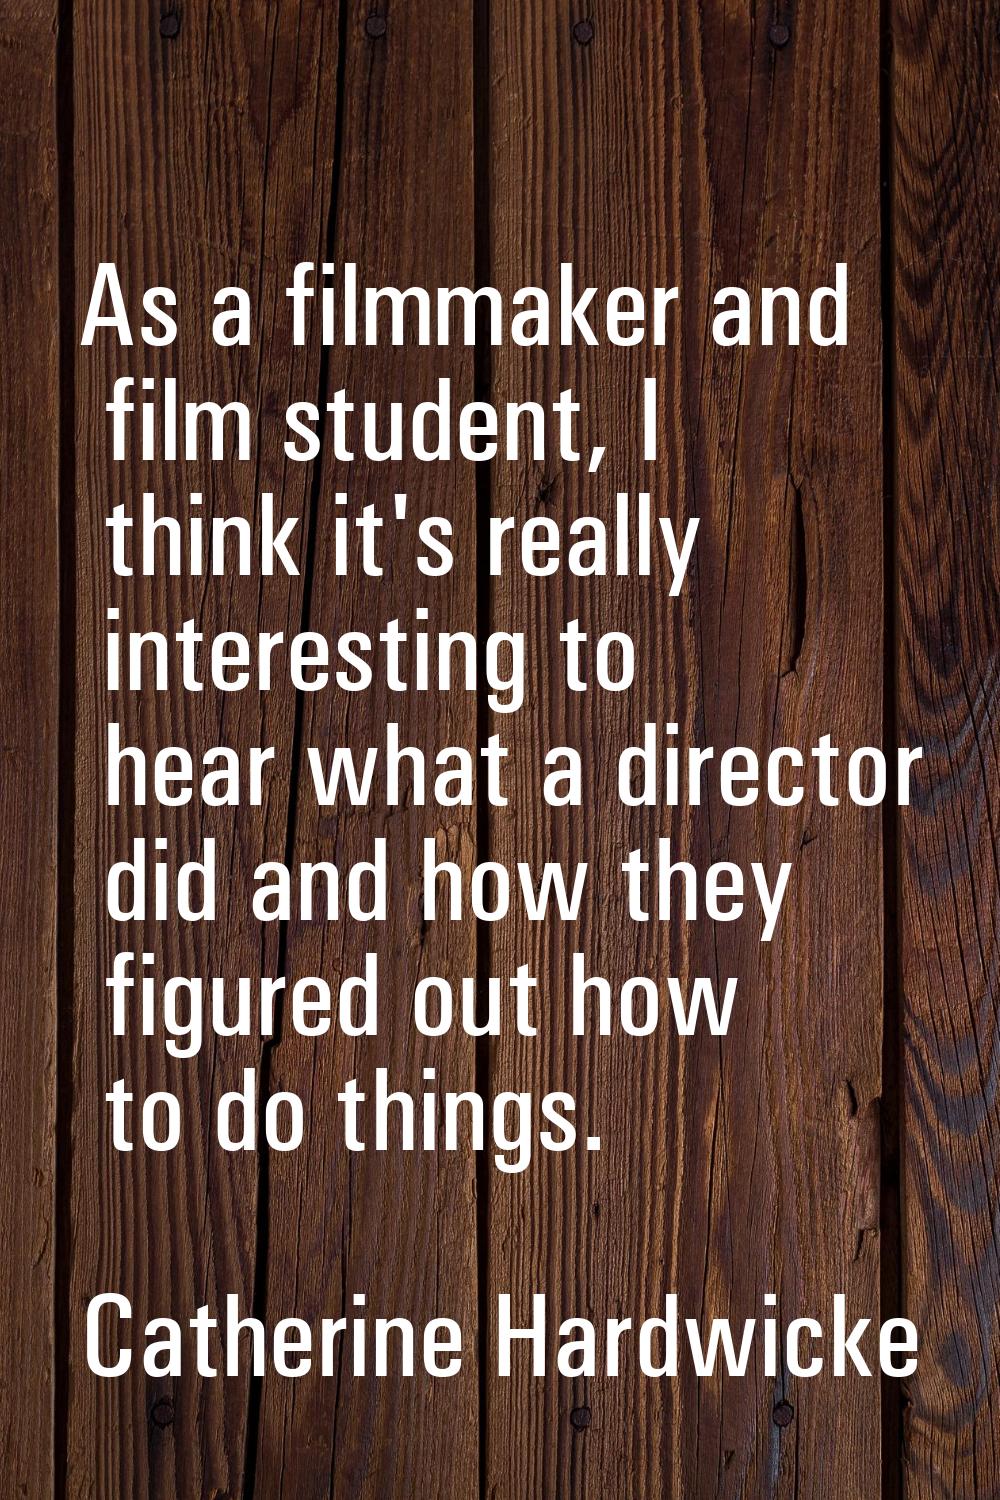 As a filmmaker and film student, I think it's really interesting to hear what a director did and ho